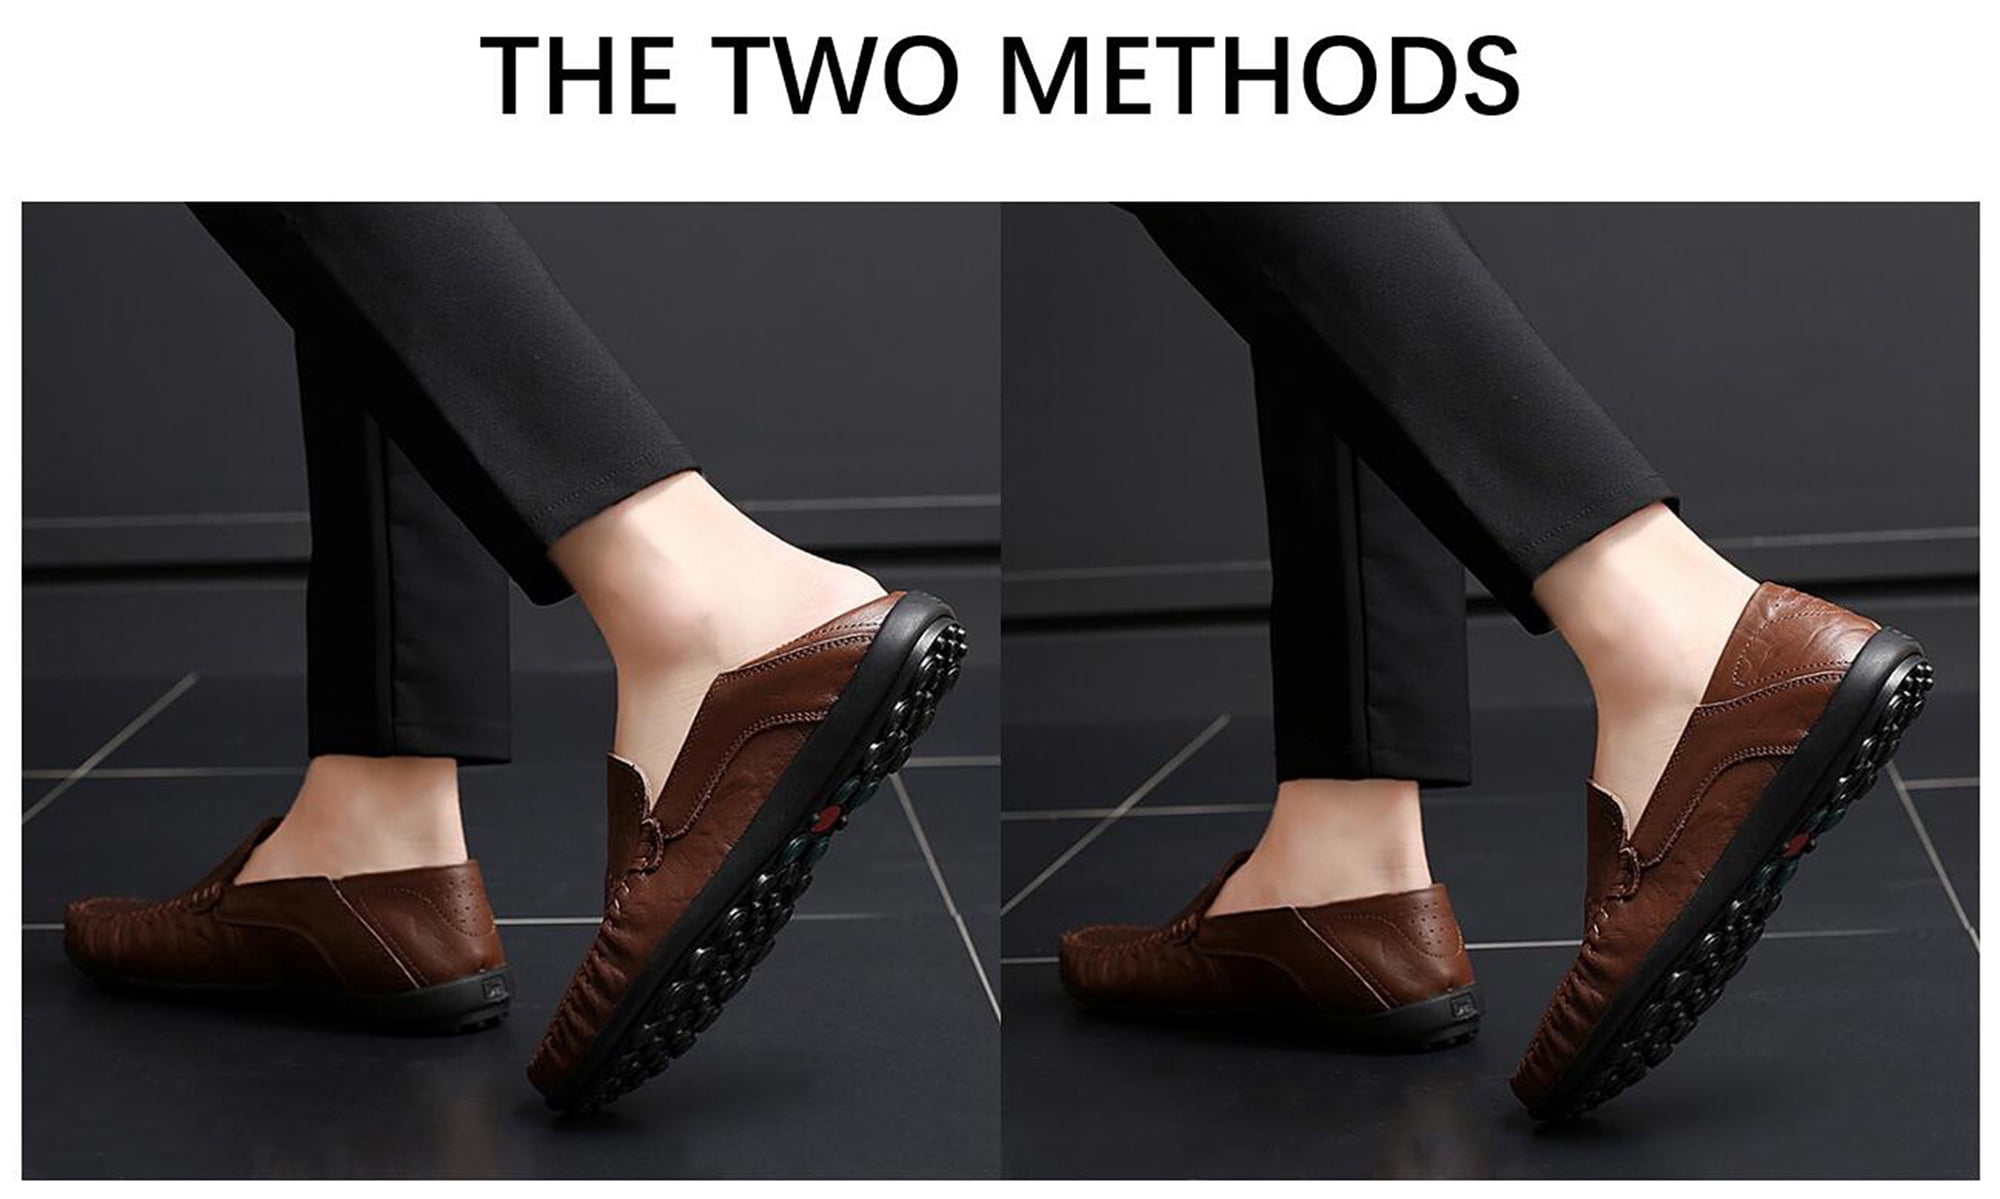 Go Tour Men's Premium Genuine Leather Casual Slip on Loafers Breathable Driving Shoes Fashion Slipper